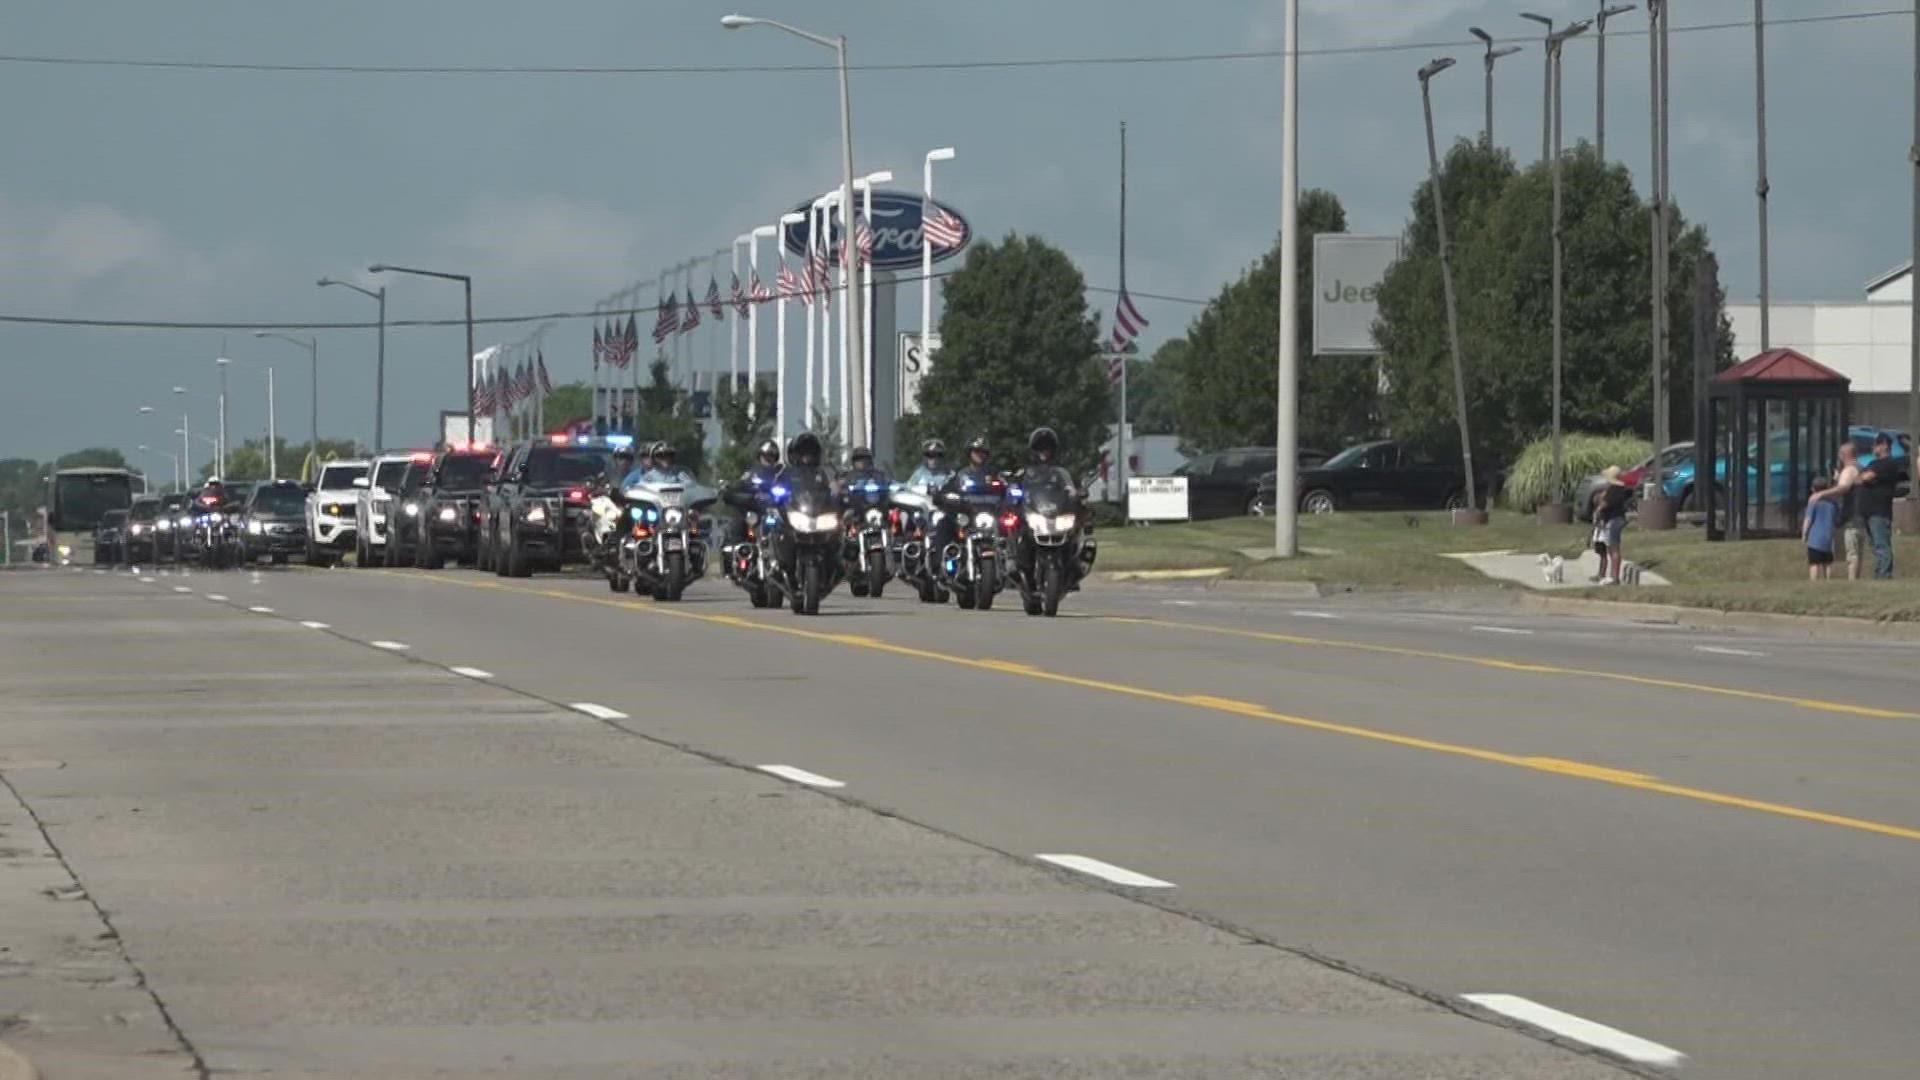 The procession escorted Sgt. Proxmire and his family to the public memorial service at Miller Auditorium in Kalamazoo.